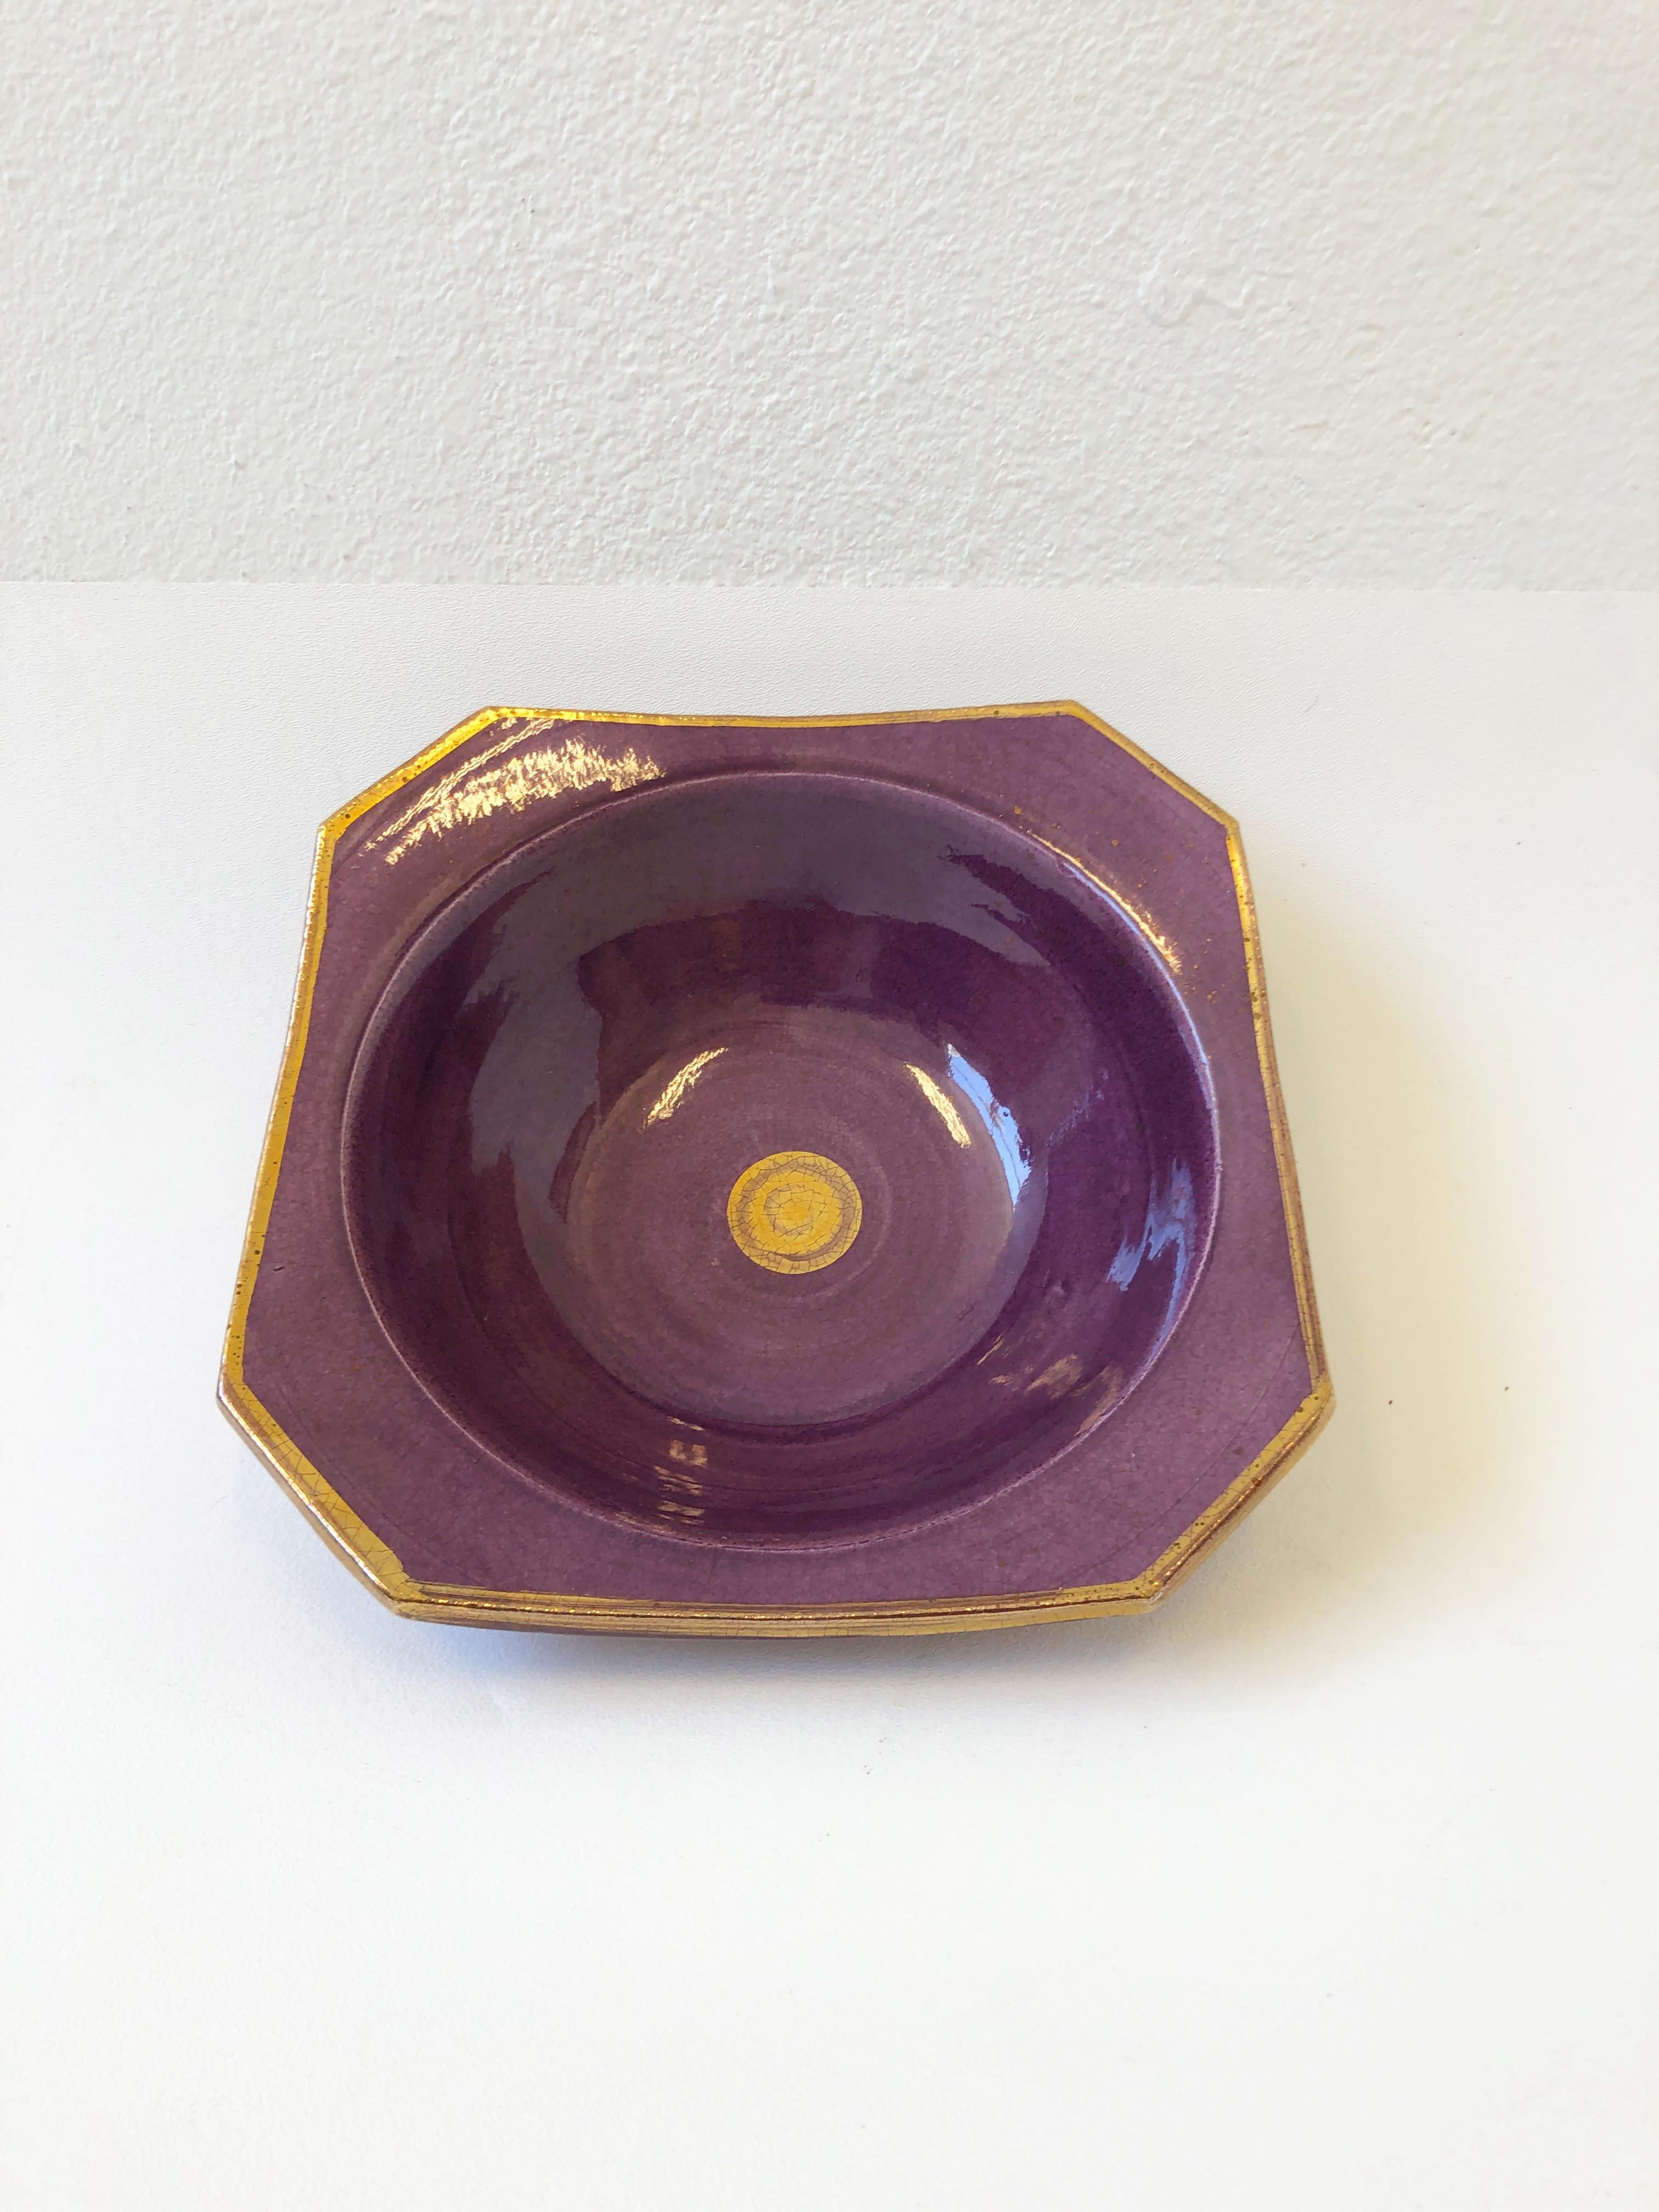 1980’s studio ceramic bowl glazed purple and gold by Gary McCloy for Steve Chase. 
Hand signed and stamped.
Measurements: 10” Wide 10” Deep and 3.25” High.